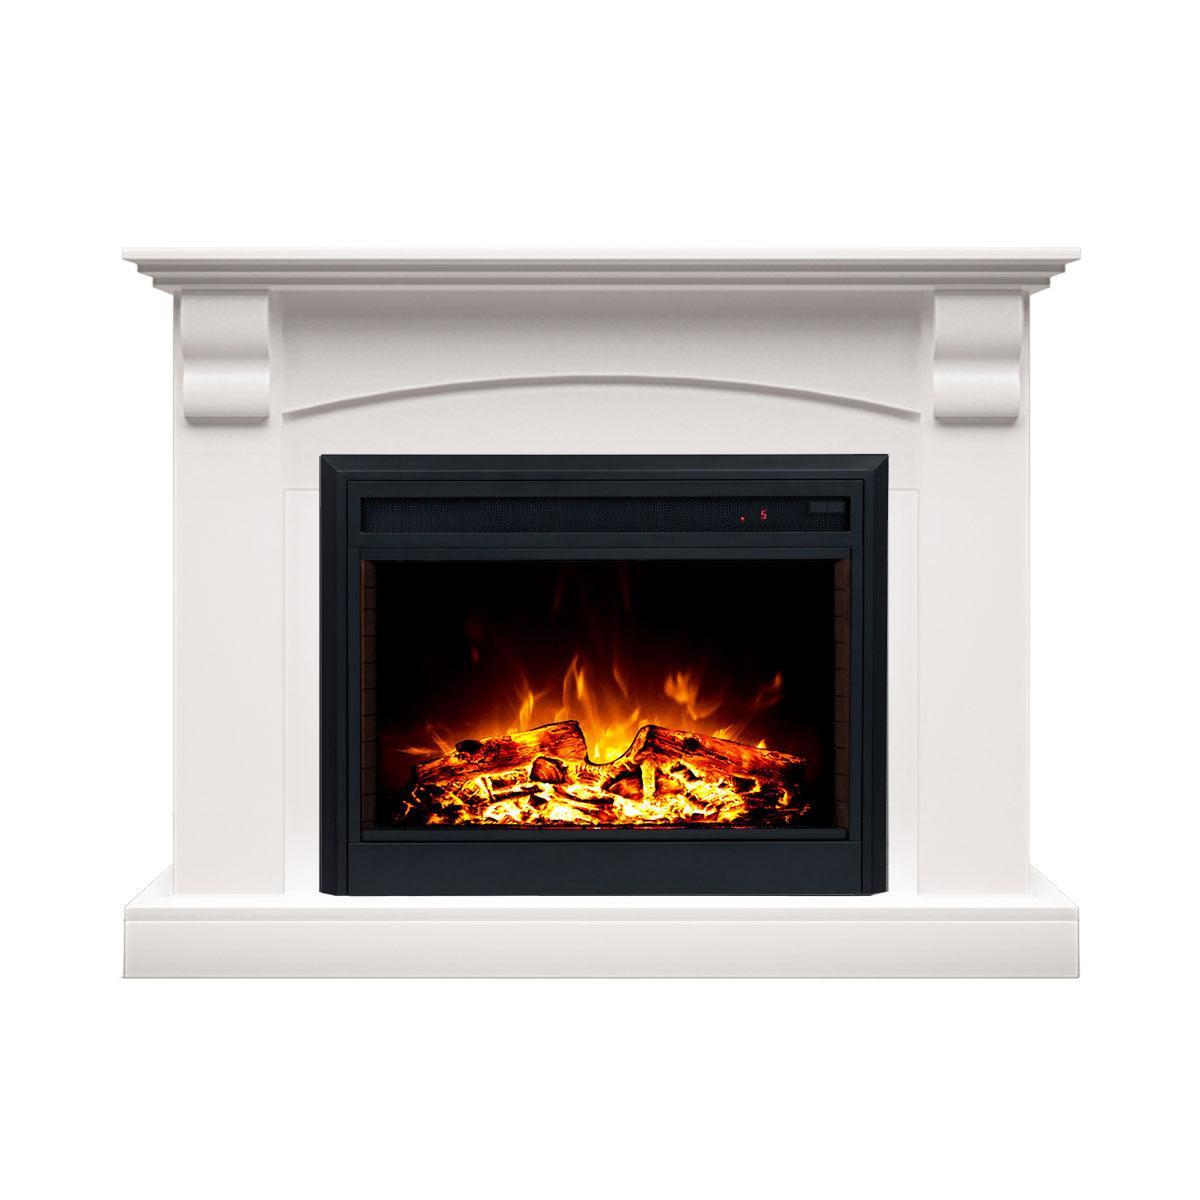 Ascot 2000W Electric Fireplace Heater White Mantel Suite with 30" Moonlight Insert